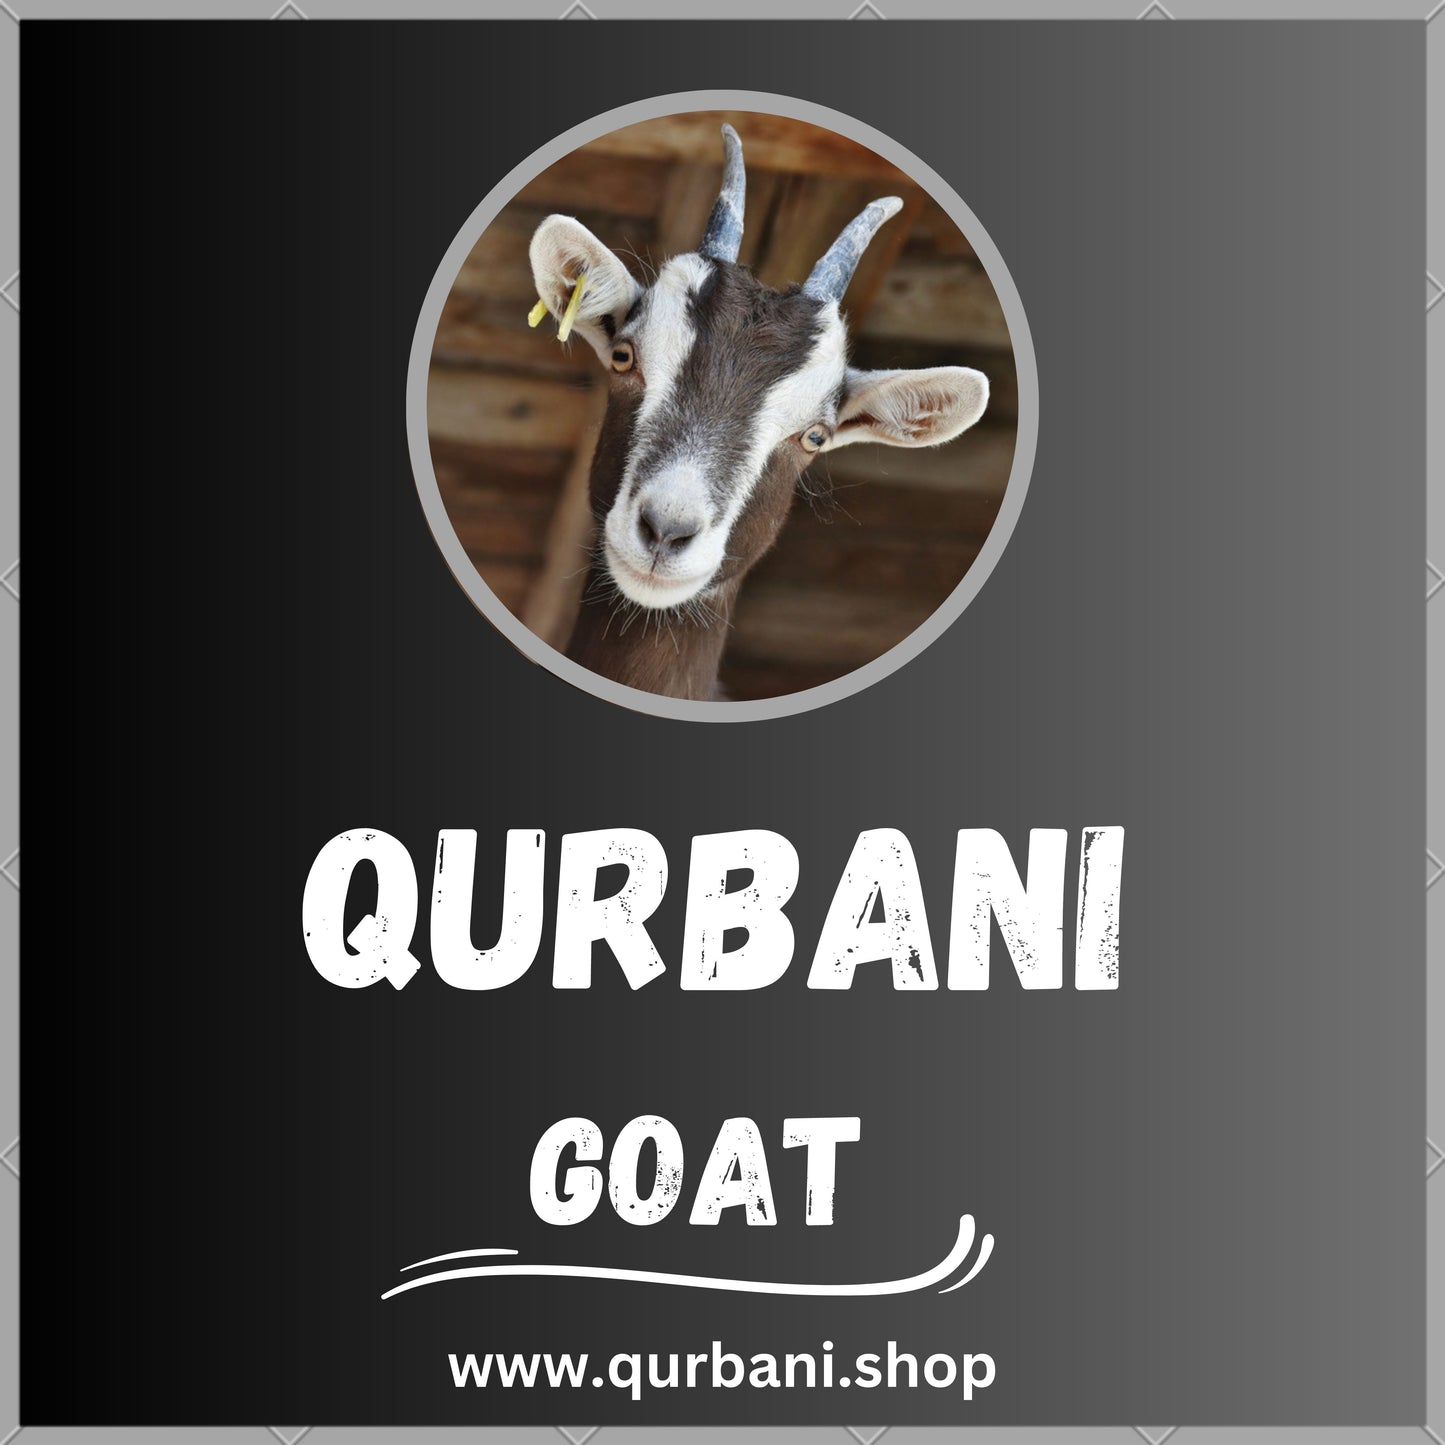 Trusted Qurbani Services in Raleigh - Order Your Eid Sacrifice Today!